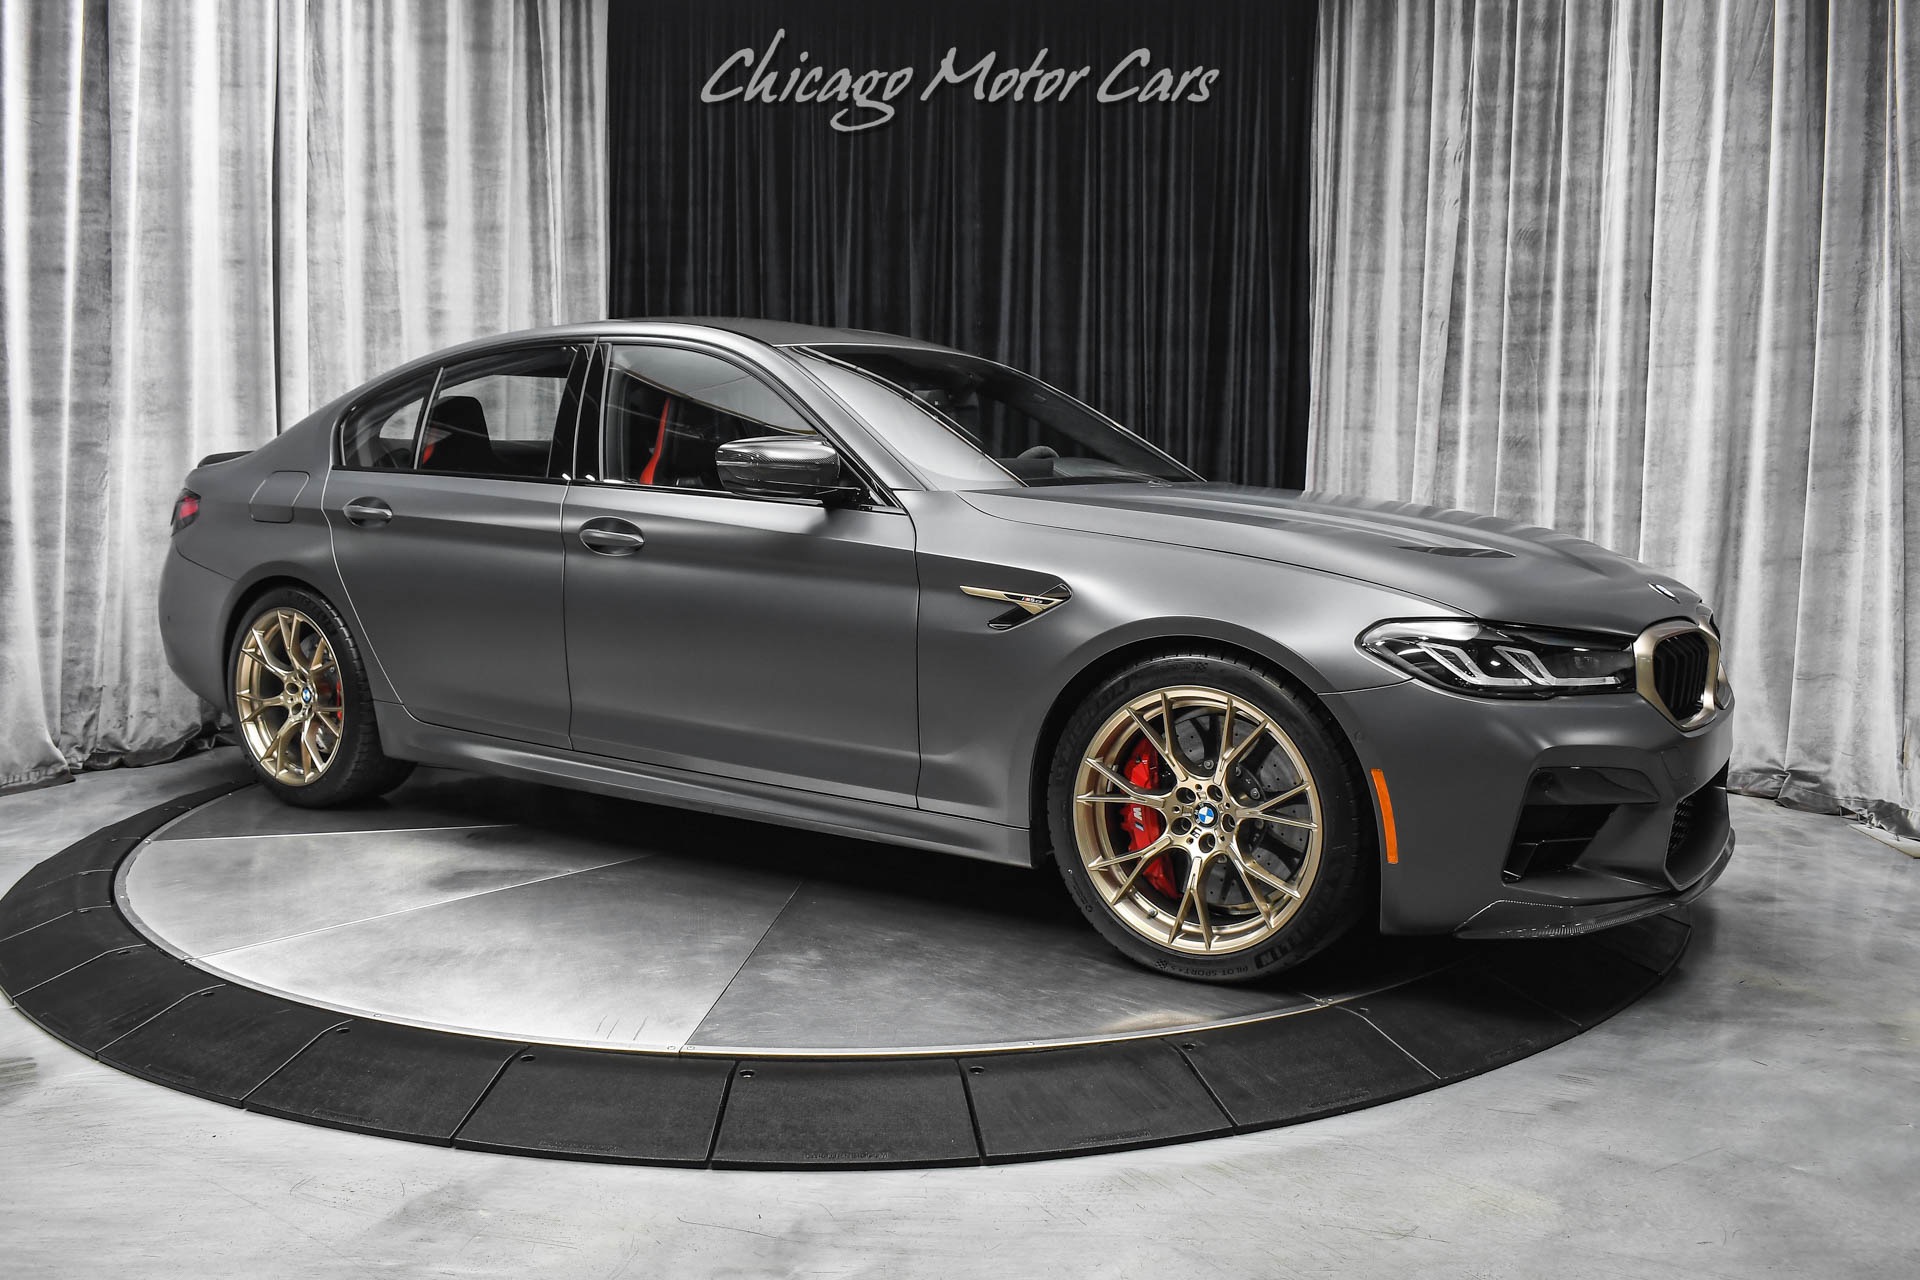 Used-2022-BMW-M5-CS-1-of-350-Made-Only-7700-Miles-LOADED148k-MSRP-RARE-Frozen-Grey